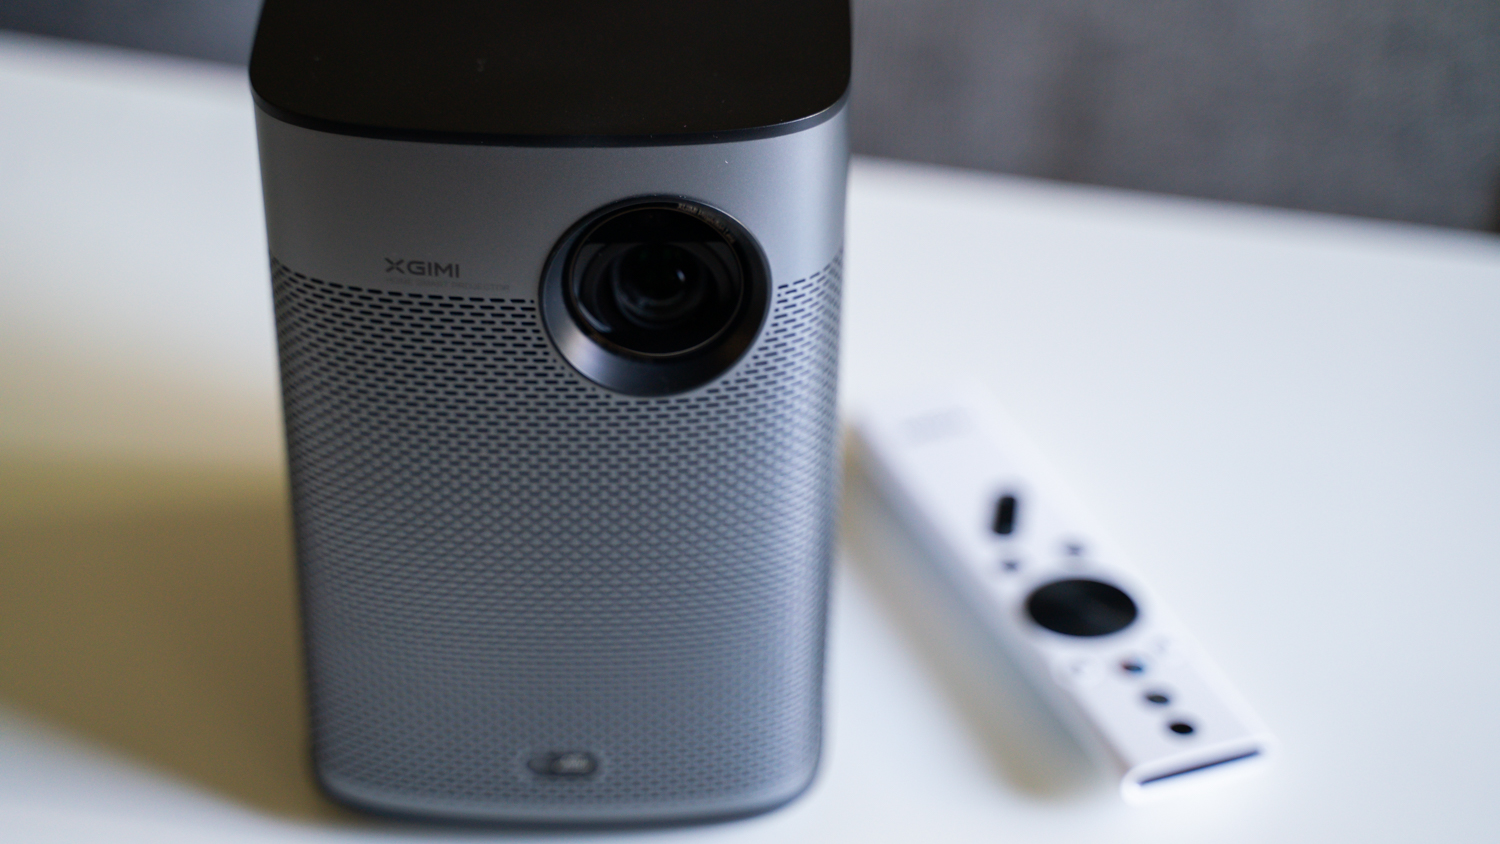 Xgimi Halo+ smart projector review: a practically perfect